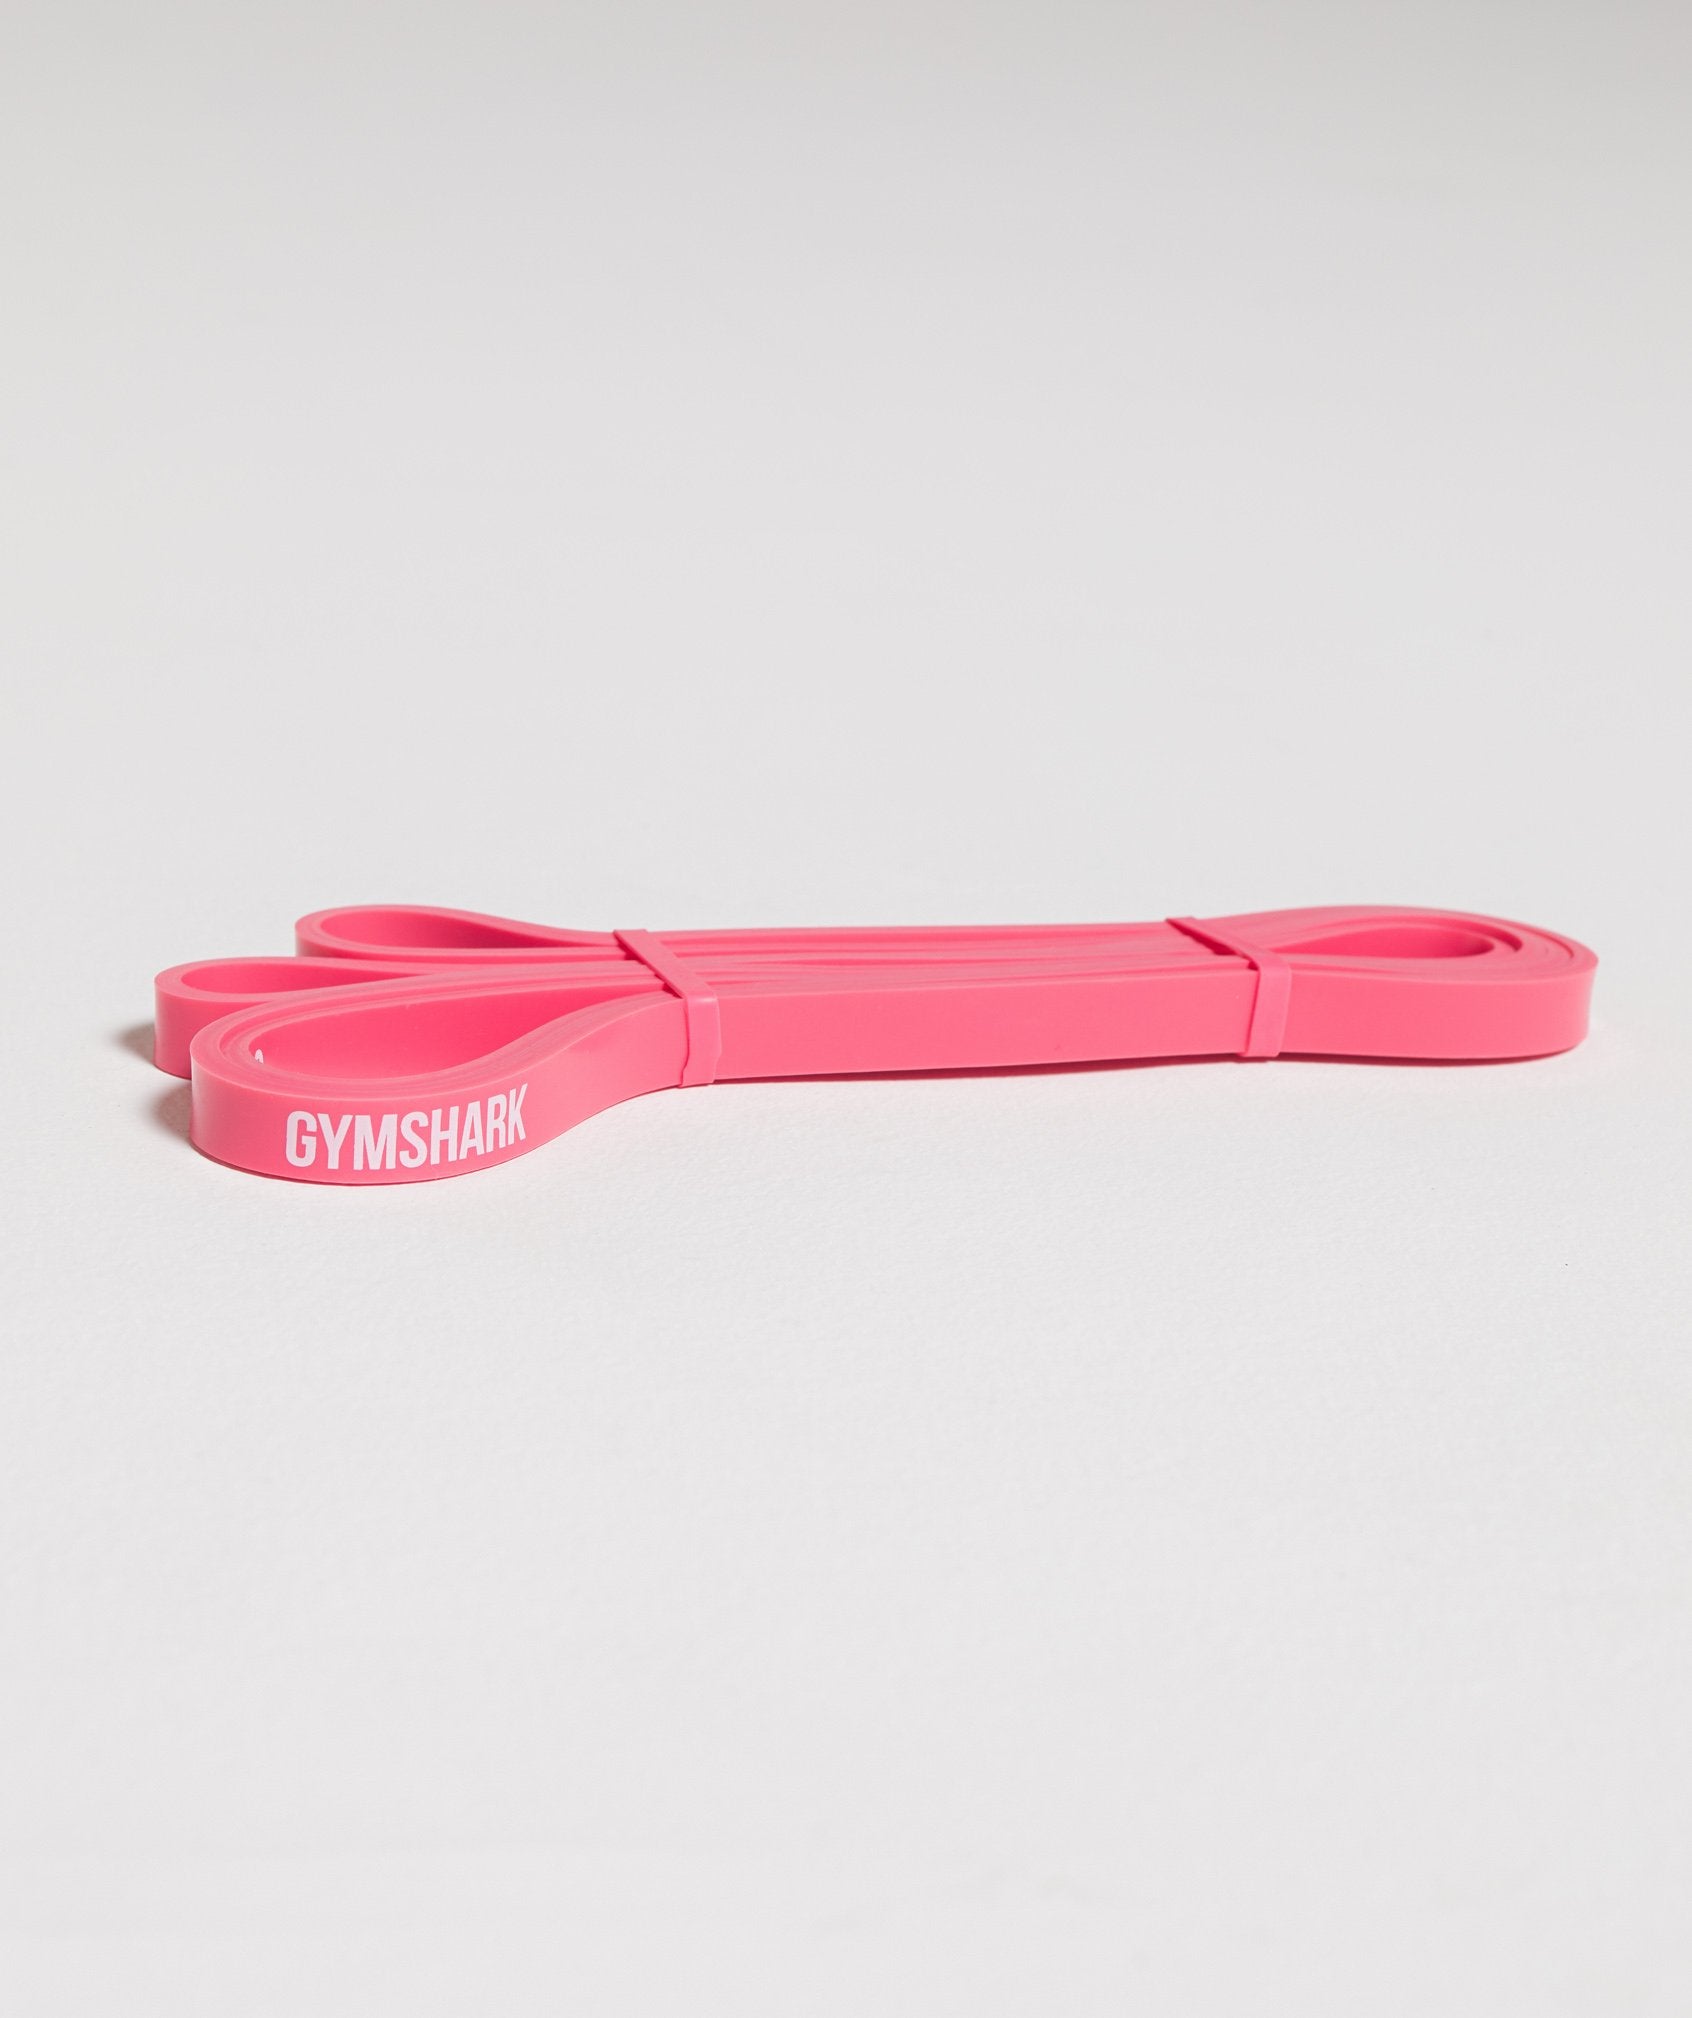 2KG to 16KG Resistance Band in Pink - view 1